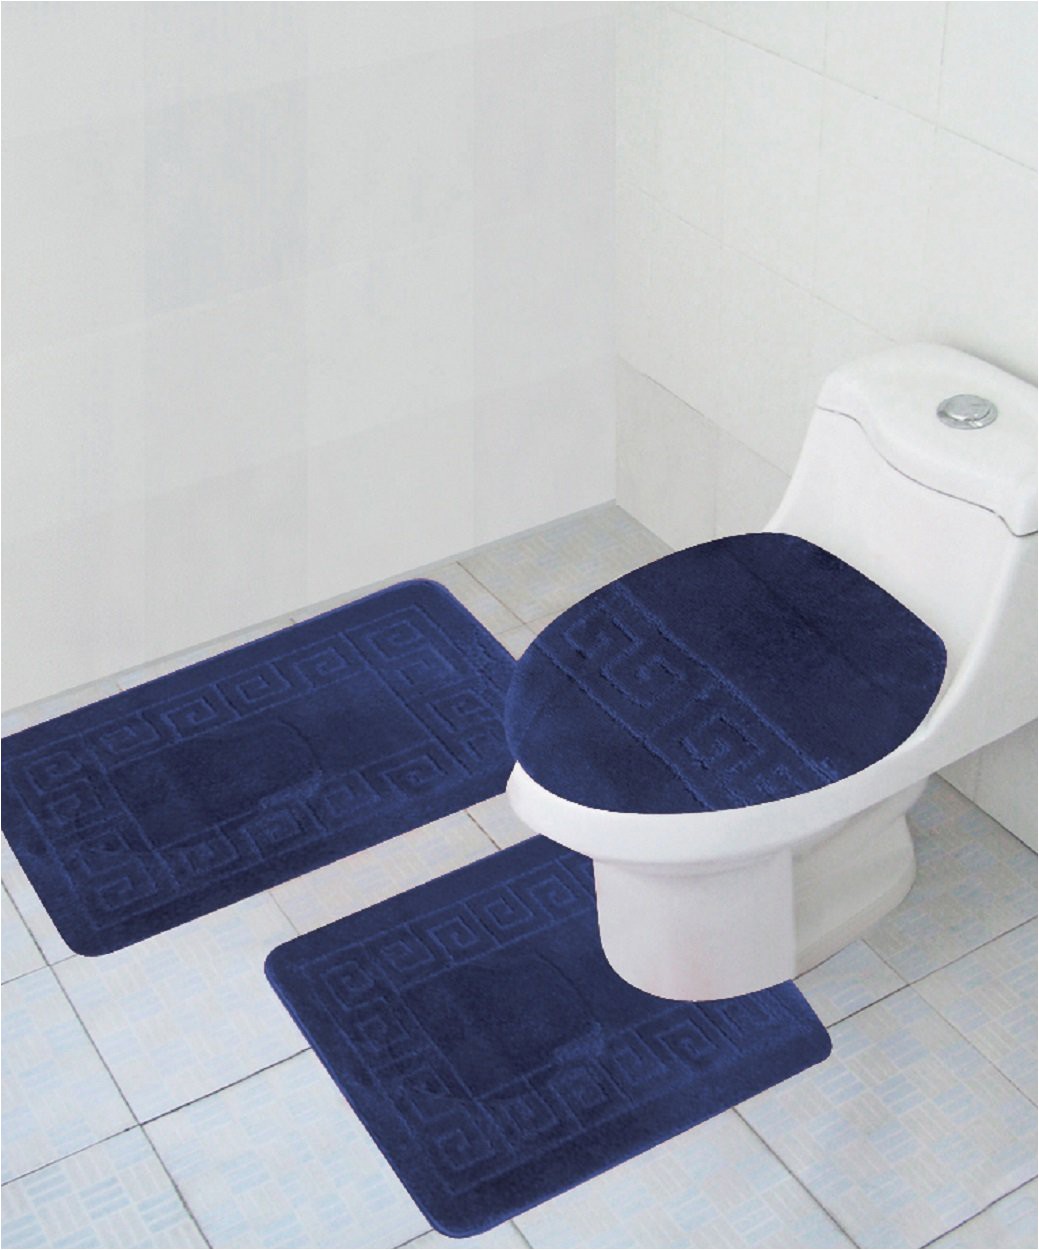 Jcpenney Red Bathroom Rugs Jcpenney Bathroom Rugs Sets Image Of Bathroom and Closet